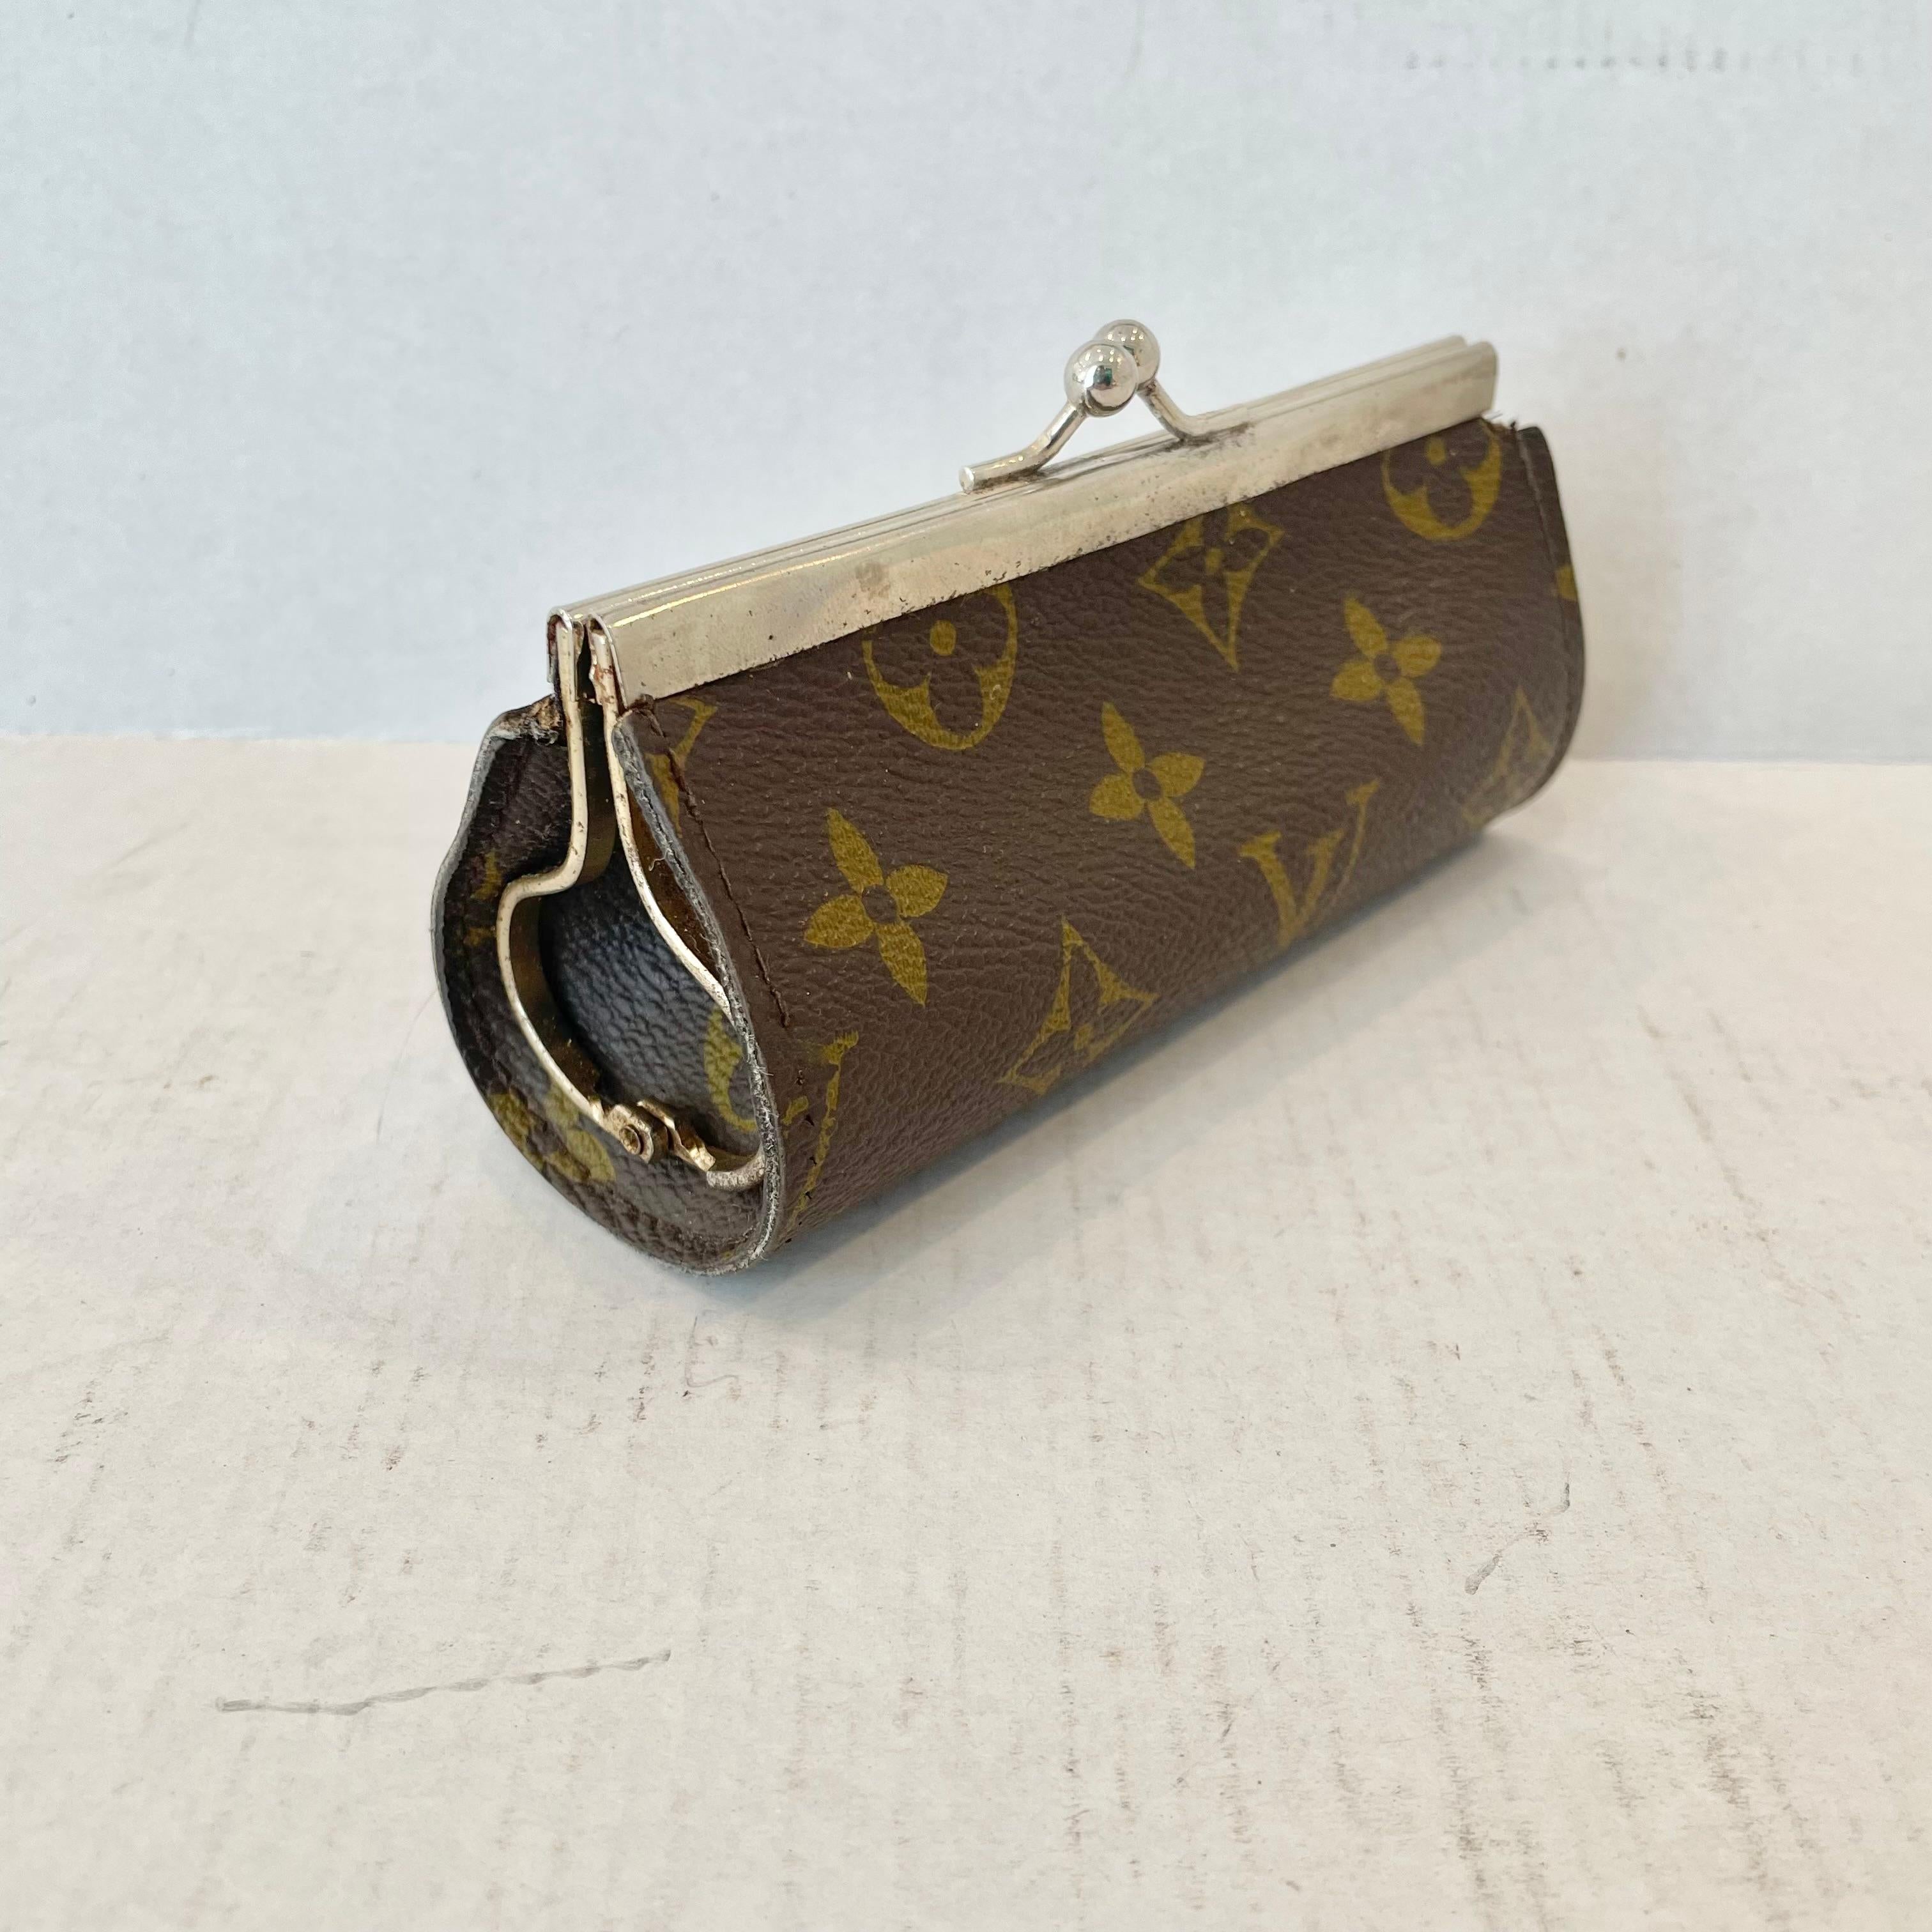 Louis Vuitton coin purse from the 1950s. Perfect for change, lipstick and other small items in your bag. The case is made of the the iconic Louis Vuitton monogram canvas with metal clasp closure and hardware. Good vintage condition with wear as